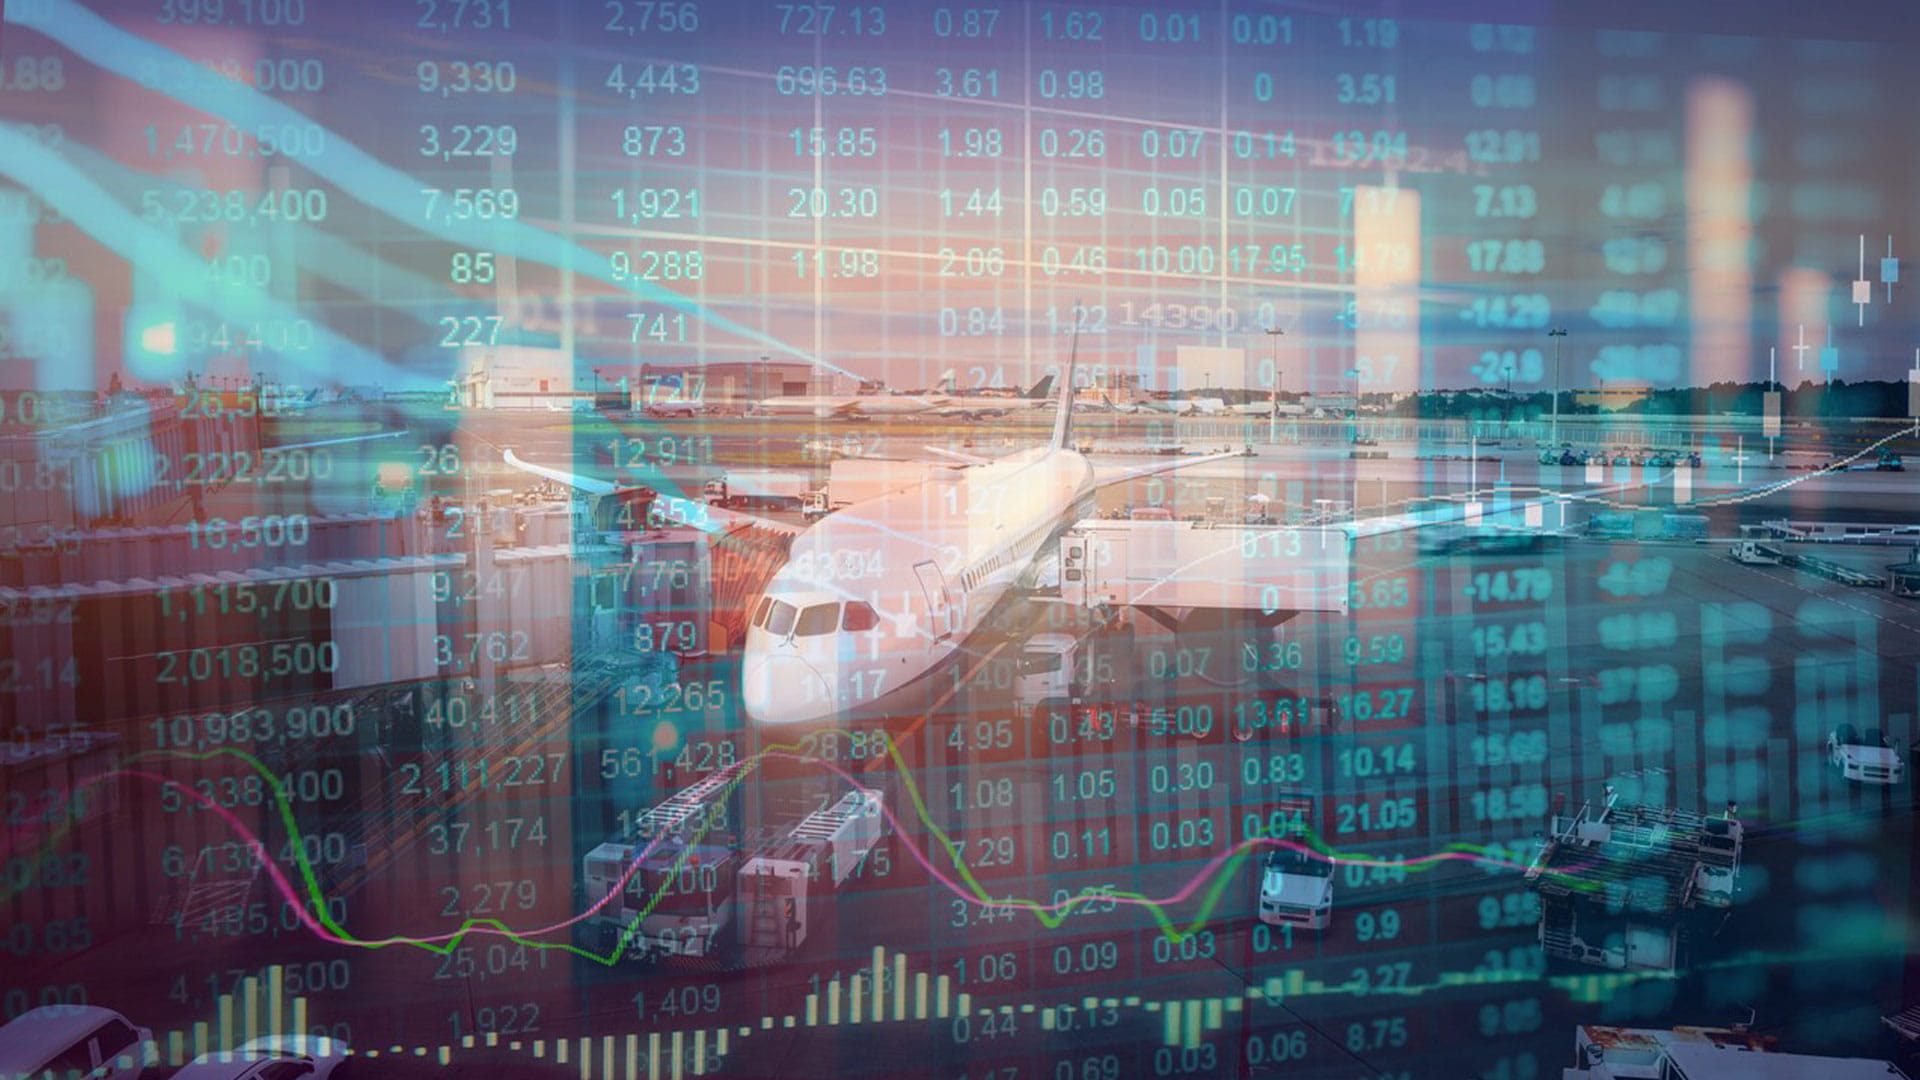 Four ways to diversify airport revenue and build business resilience